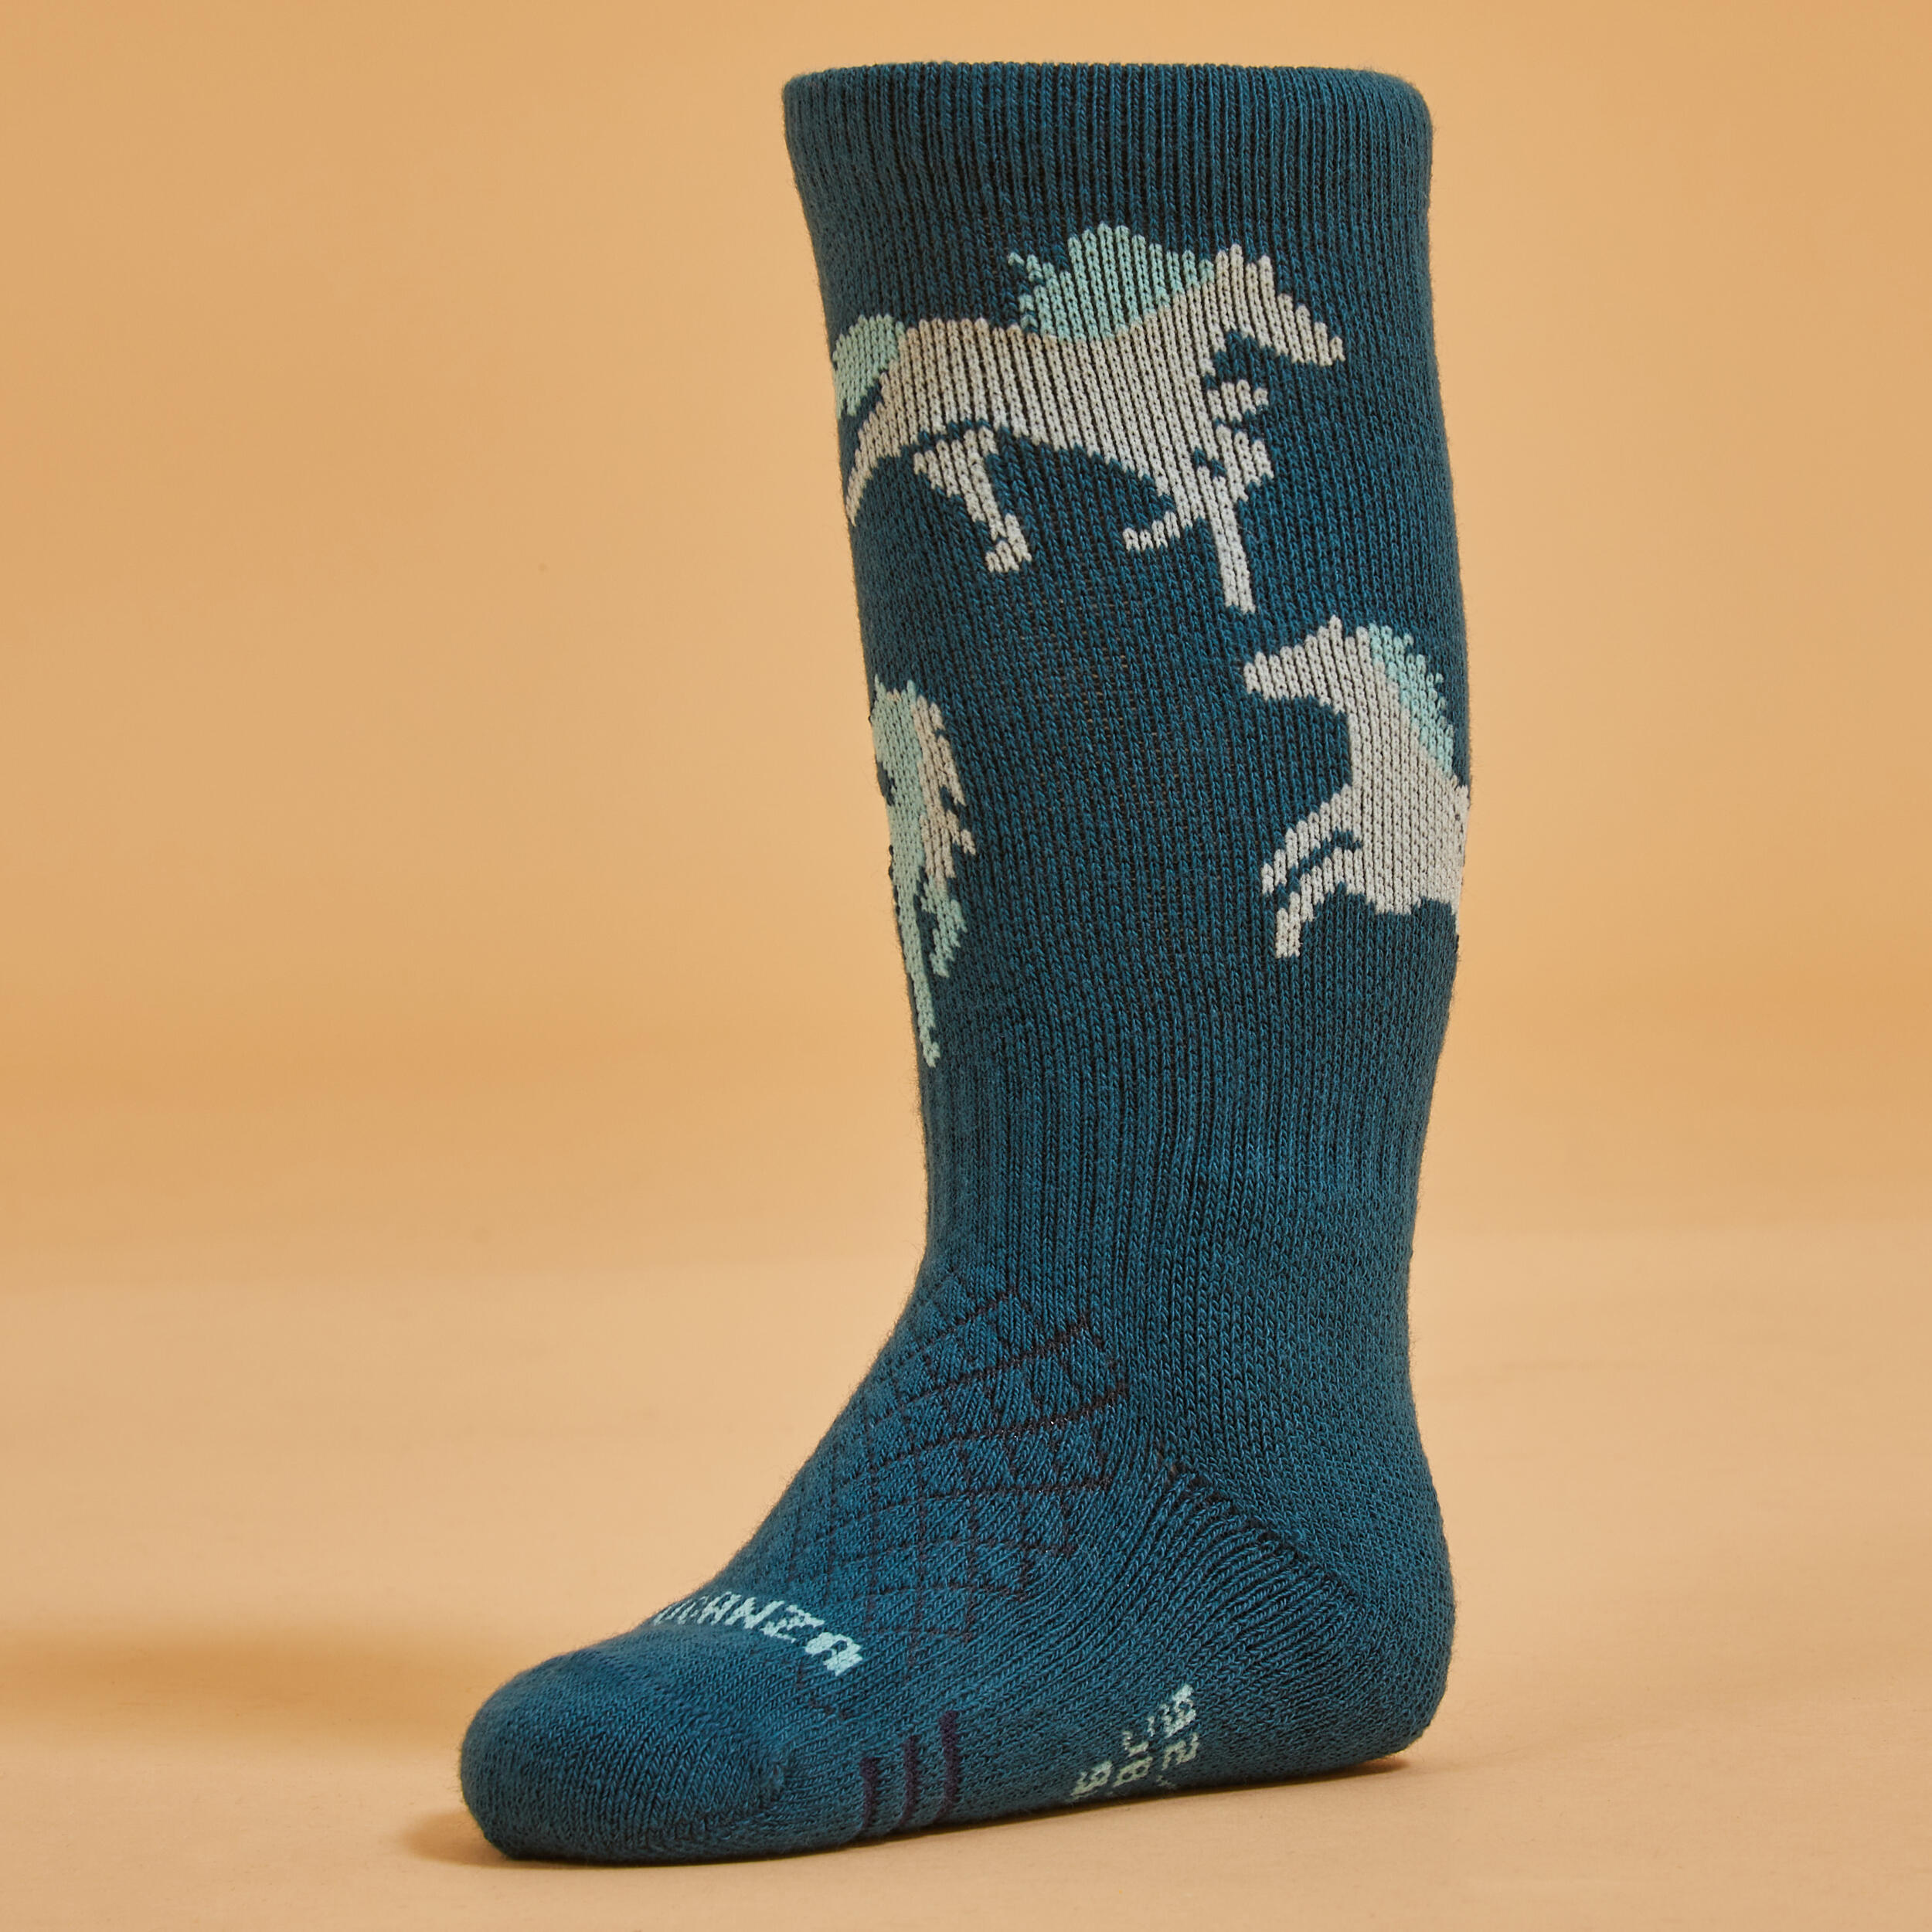 Horse Riding Socks 500 Baby - Turquoise/Green with Designs 8/10